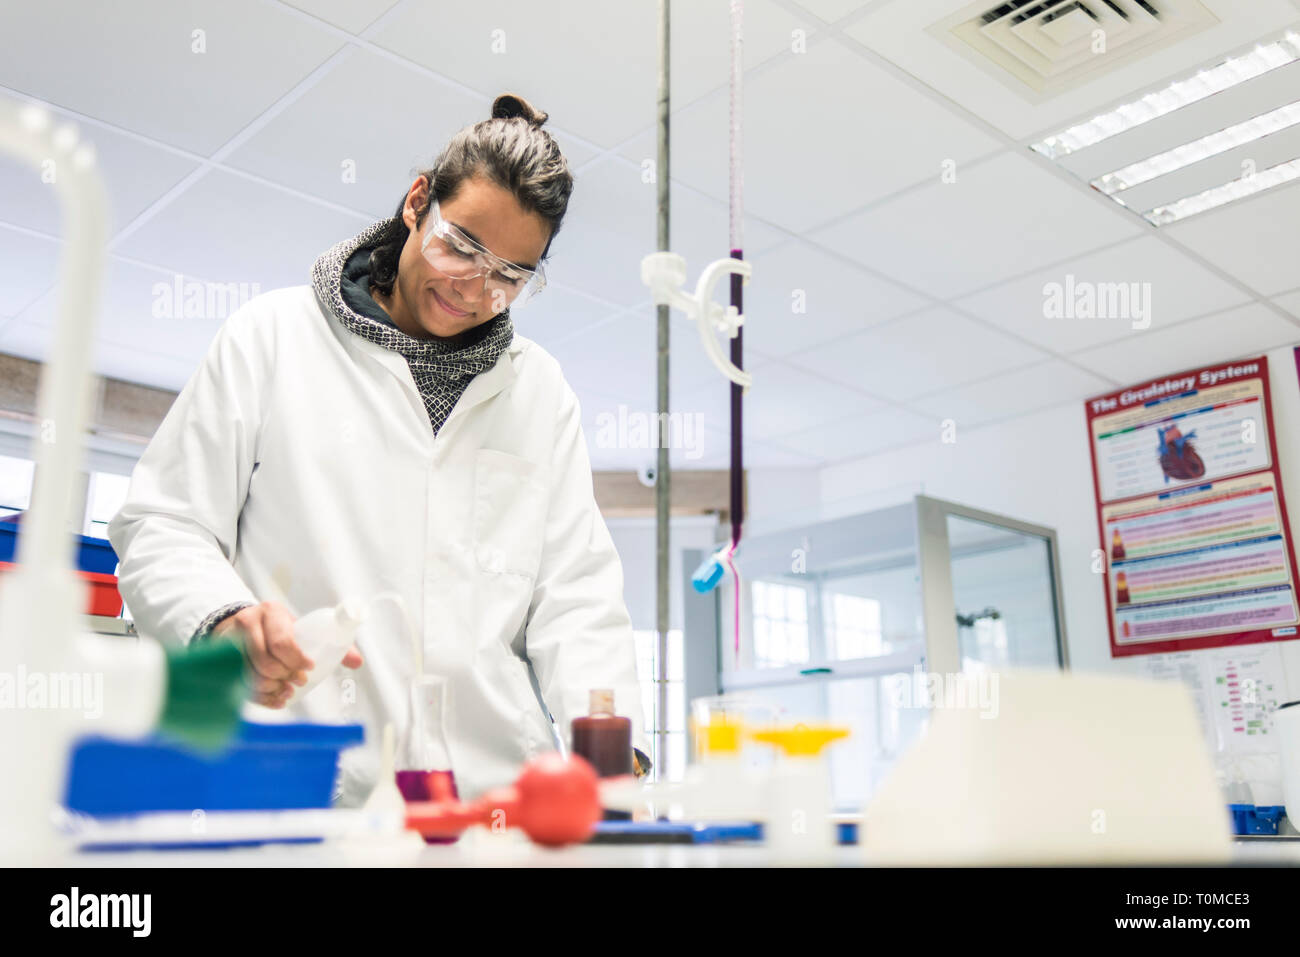 A young male student works in the science lab of a cambridge college in a white lab coat Stock Photo